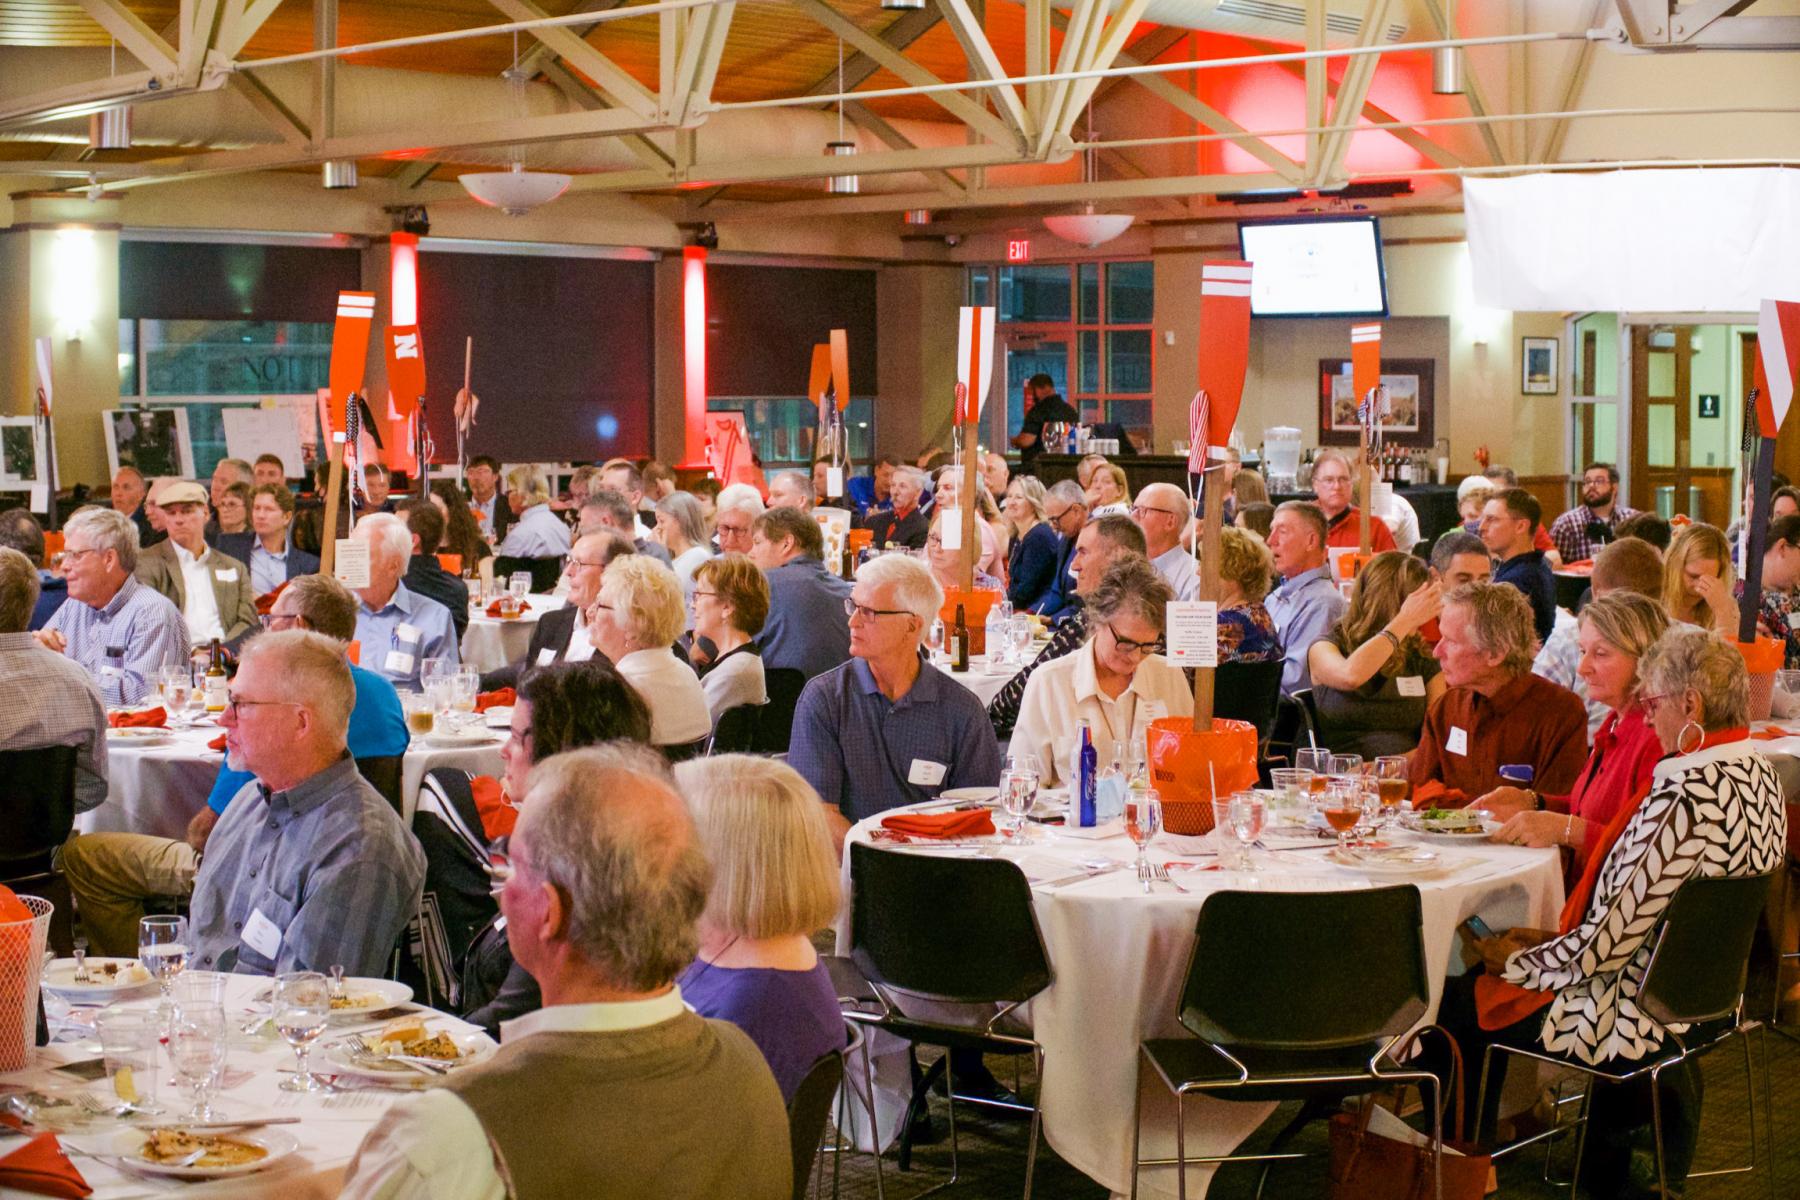 Donors attend an event at the Champions Club